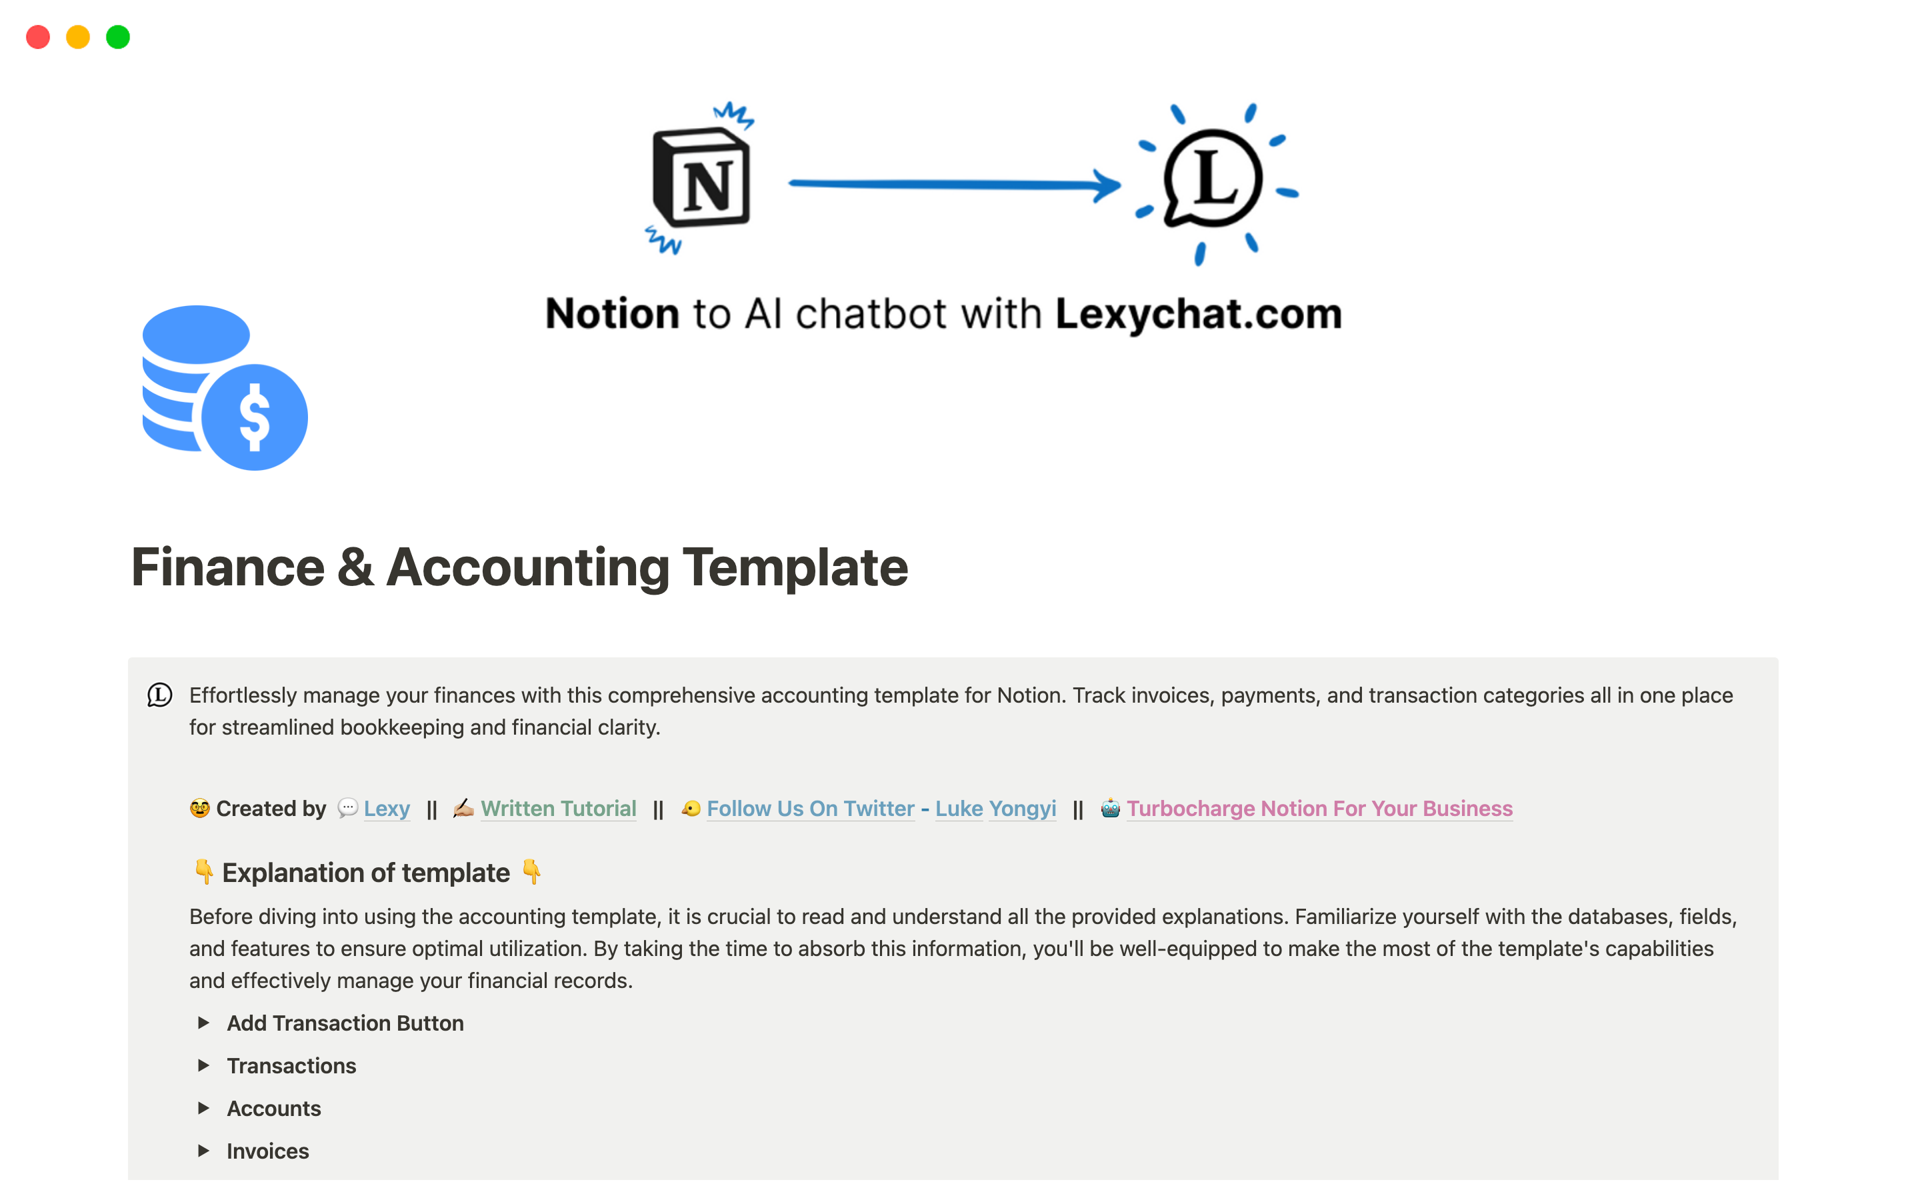 Simplify your financial management and say goodbye to expensive accounting software with the Ultimate Accounting, Bookkeeping, and Finance template for Notion.